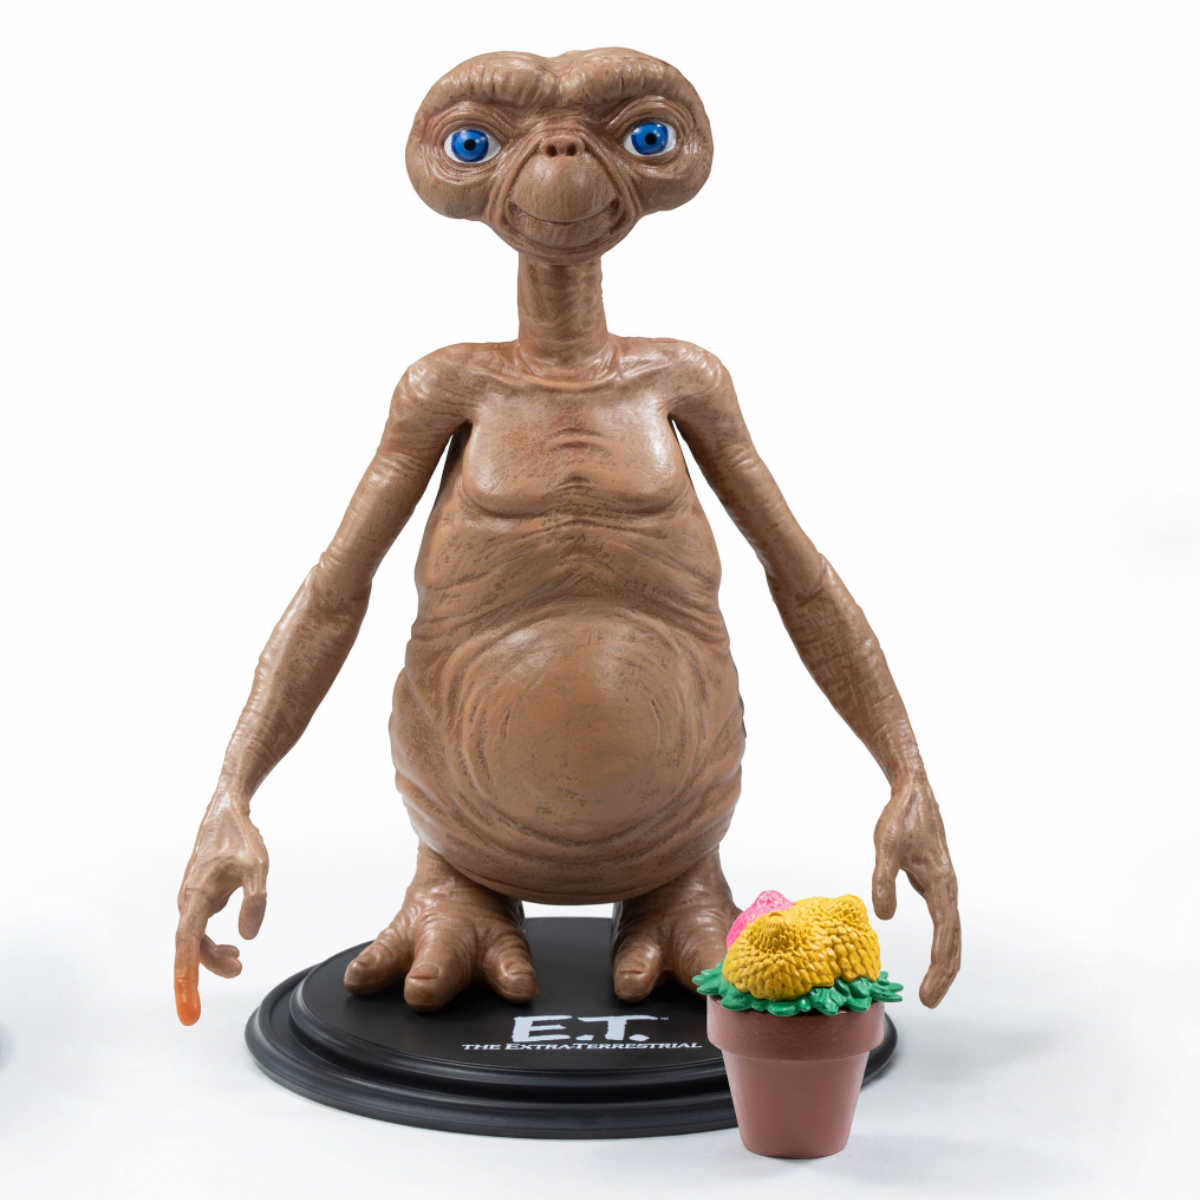 40th anniversary et collectible